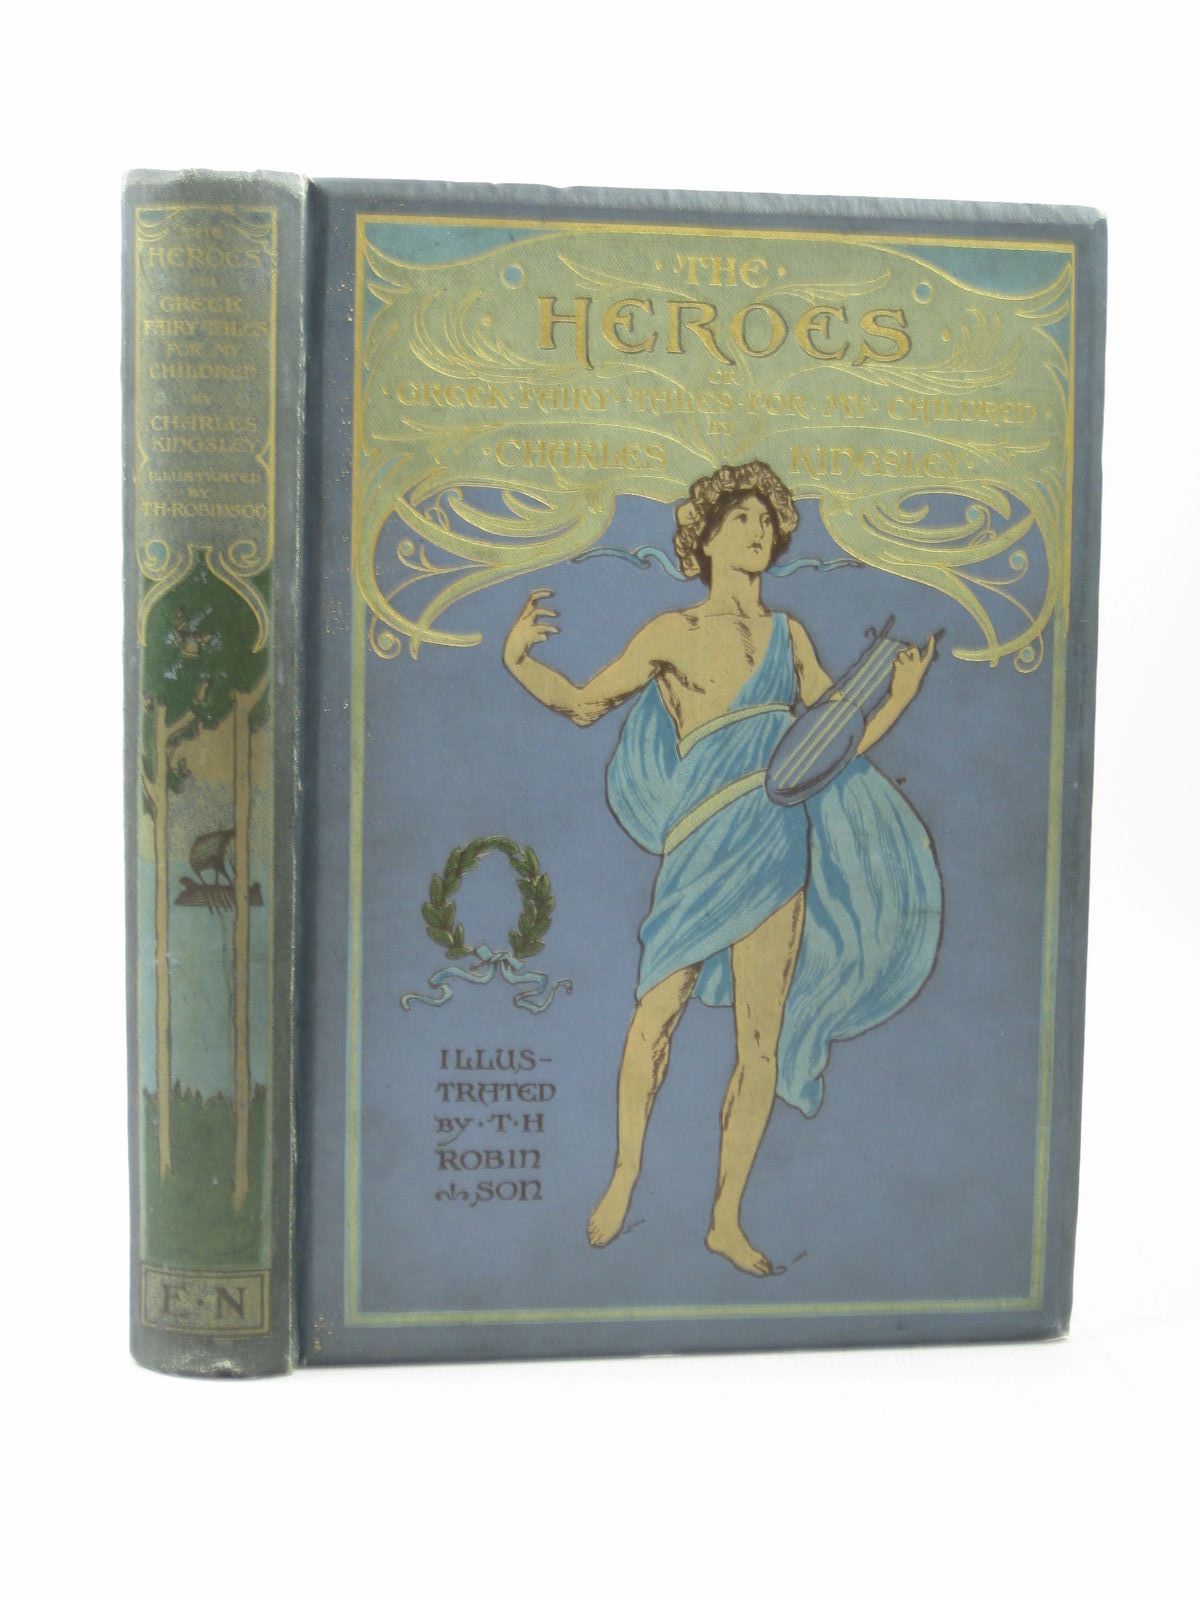 Cover of THE HEROES OR GREEK FAIRY TALES FOR MY CHILDREN by Charles Kingsley